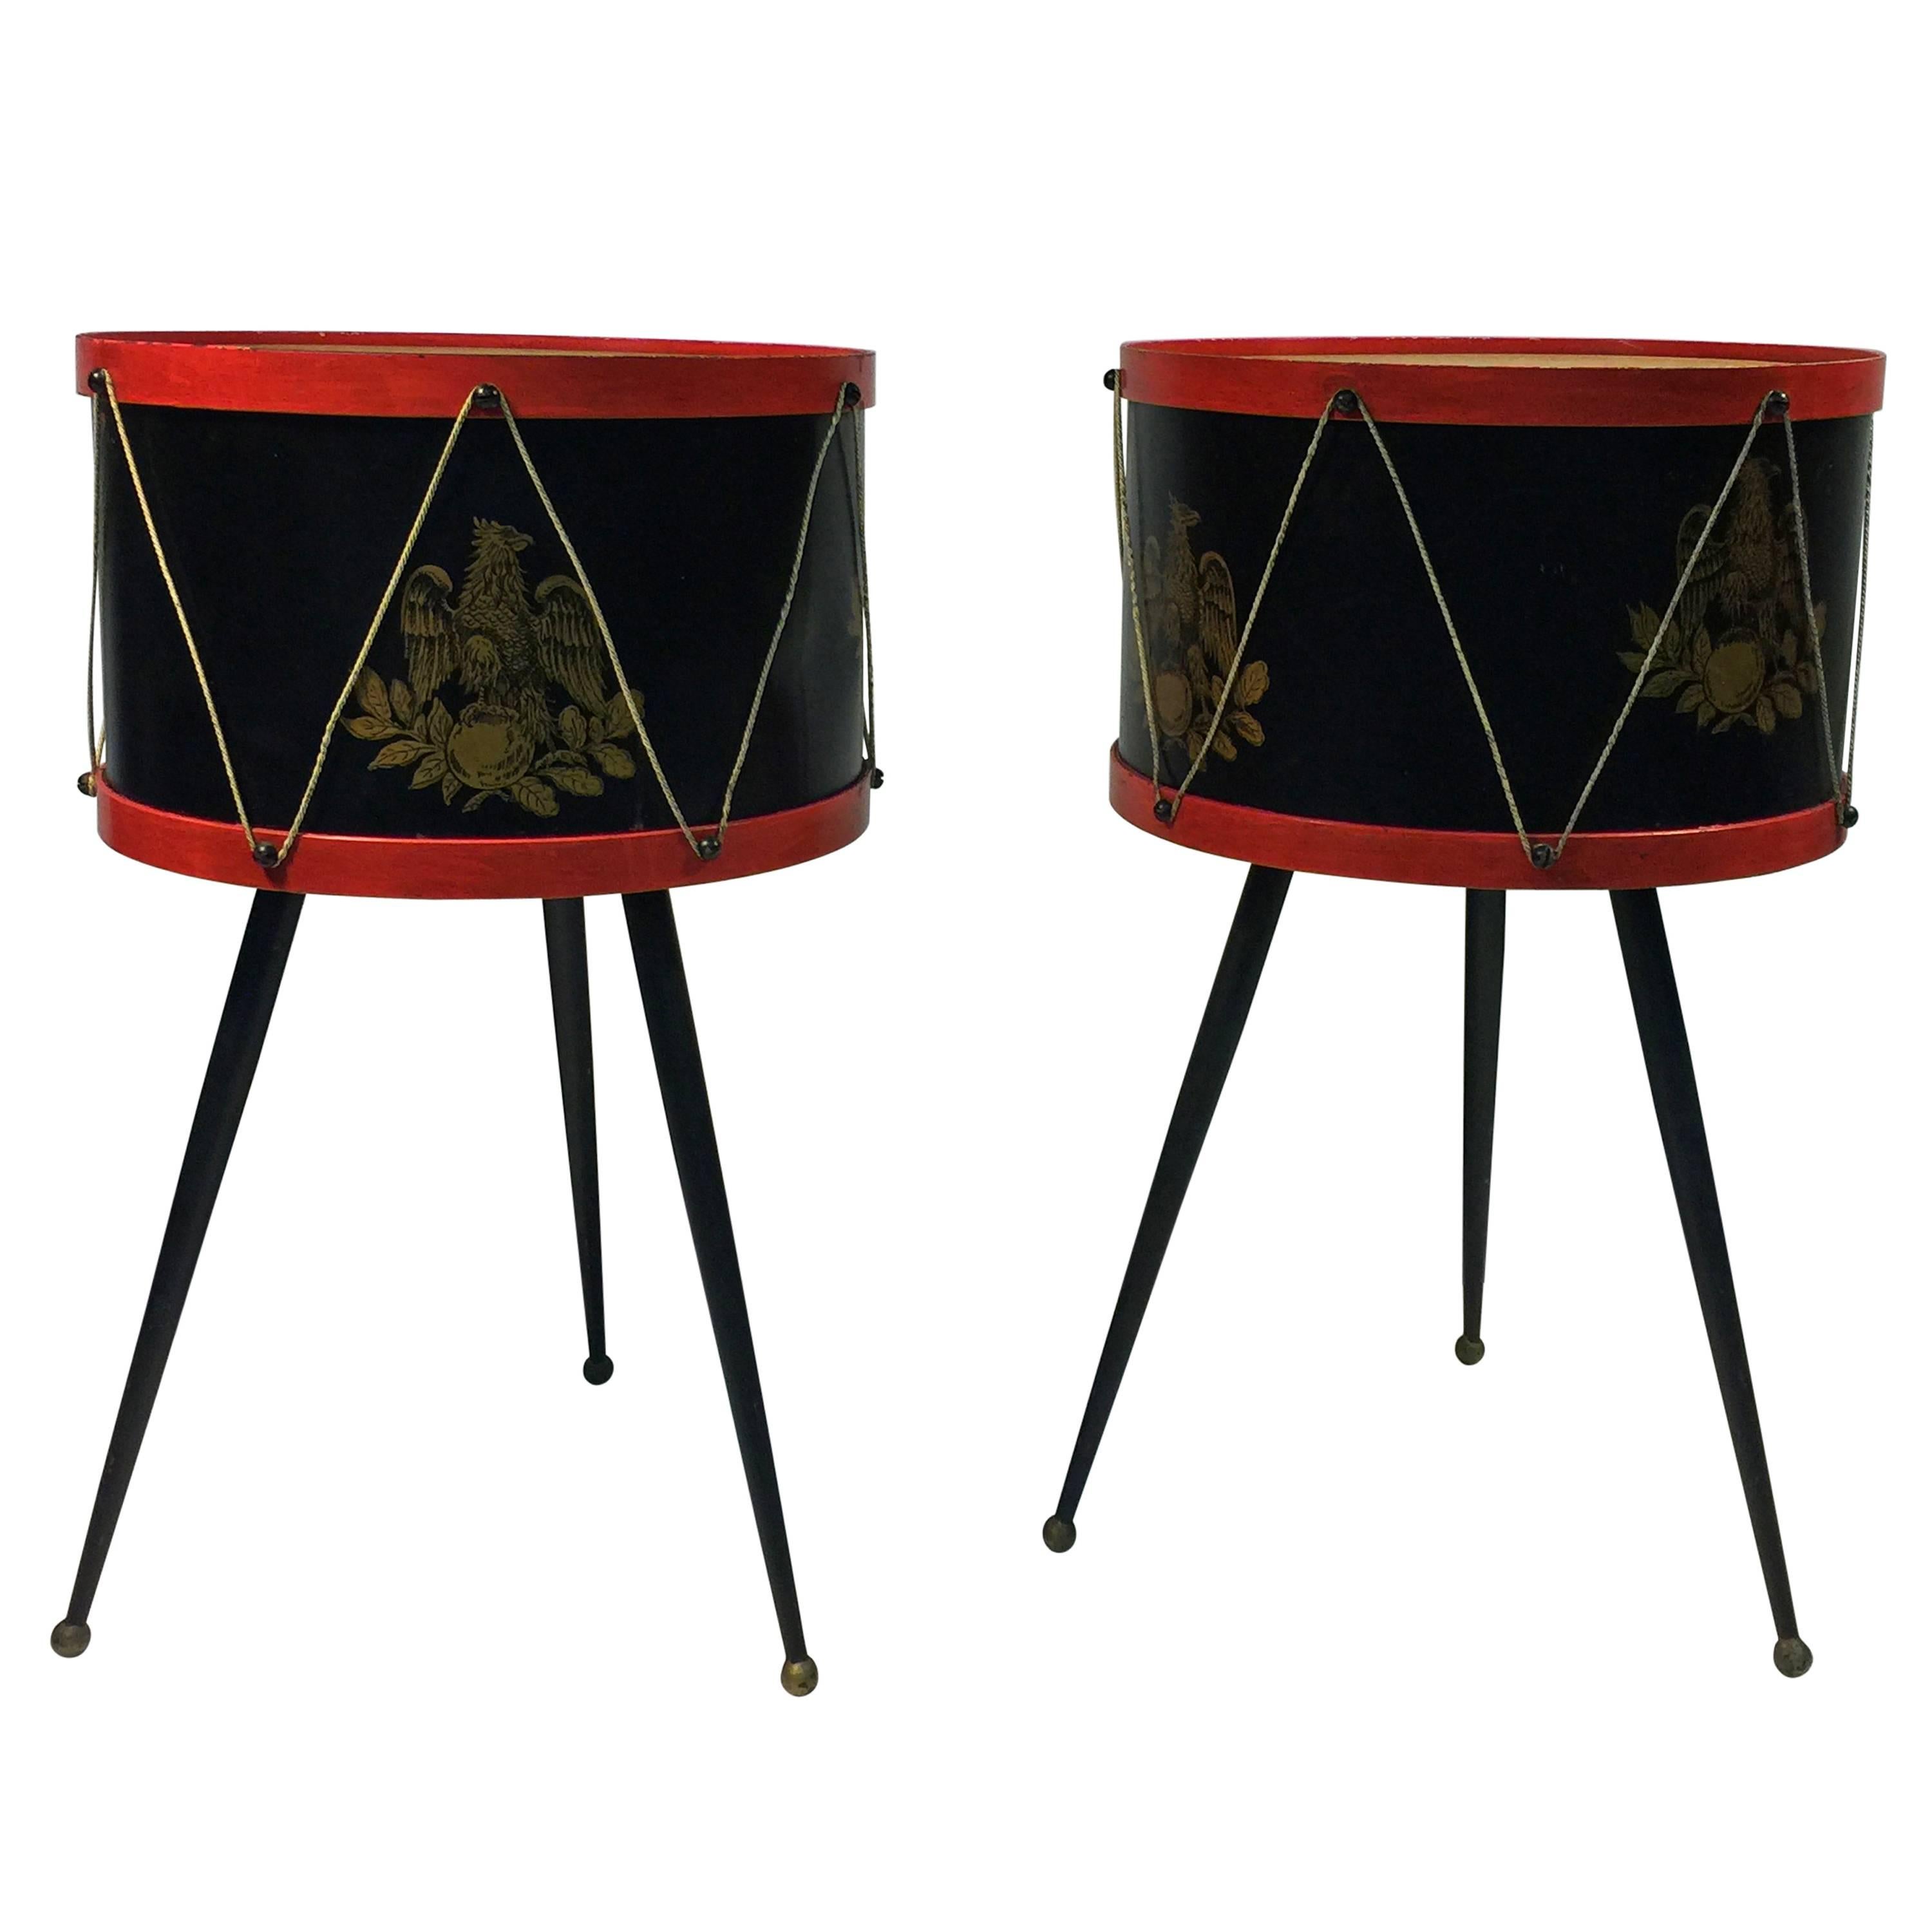 Fantastic Pair of Mid Century Drum Tole Side Tables Attributed to Fornasetti For Sale